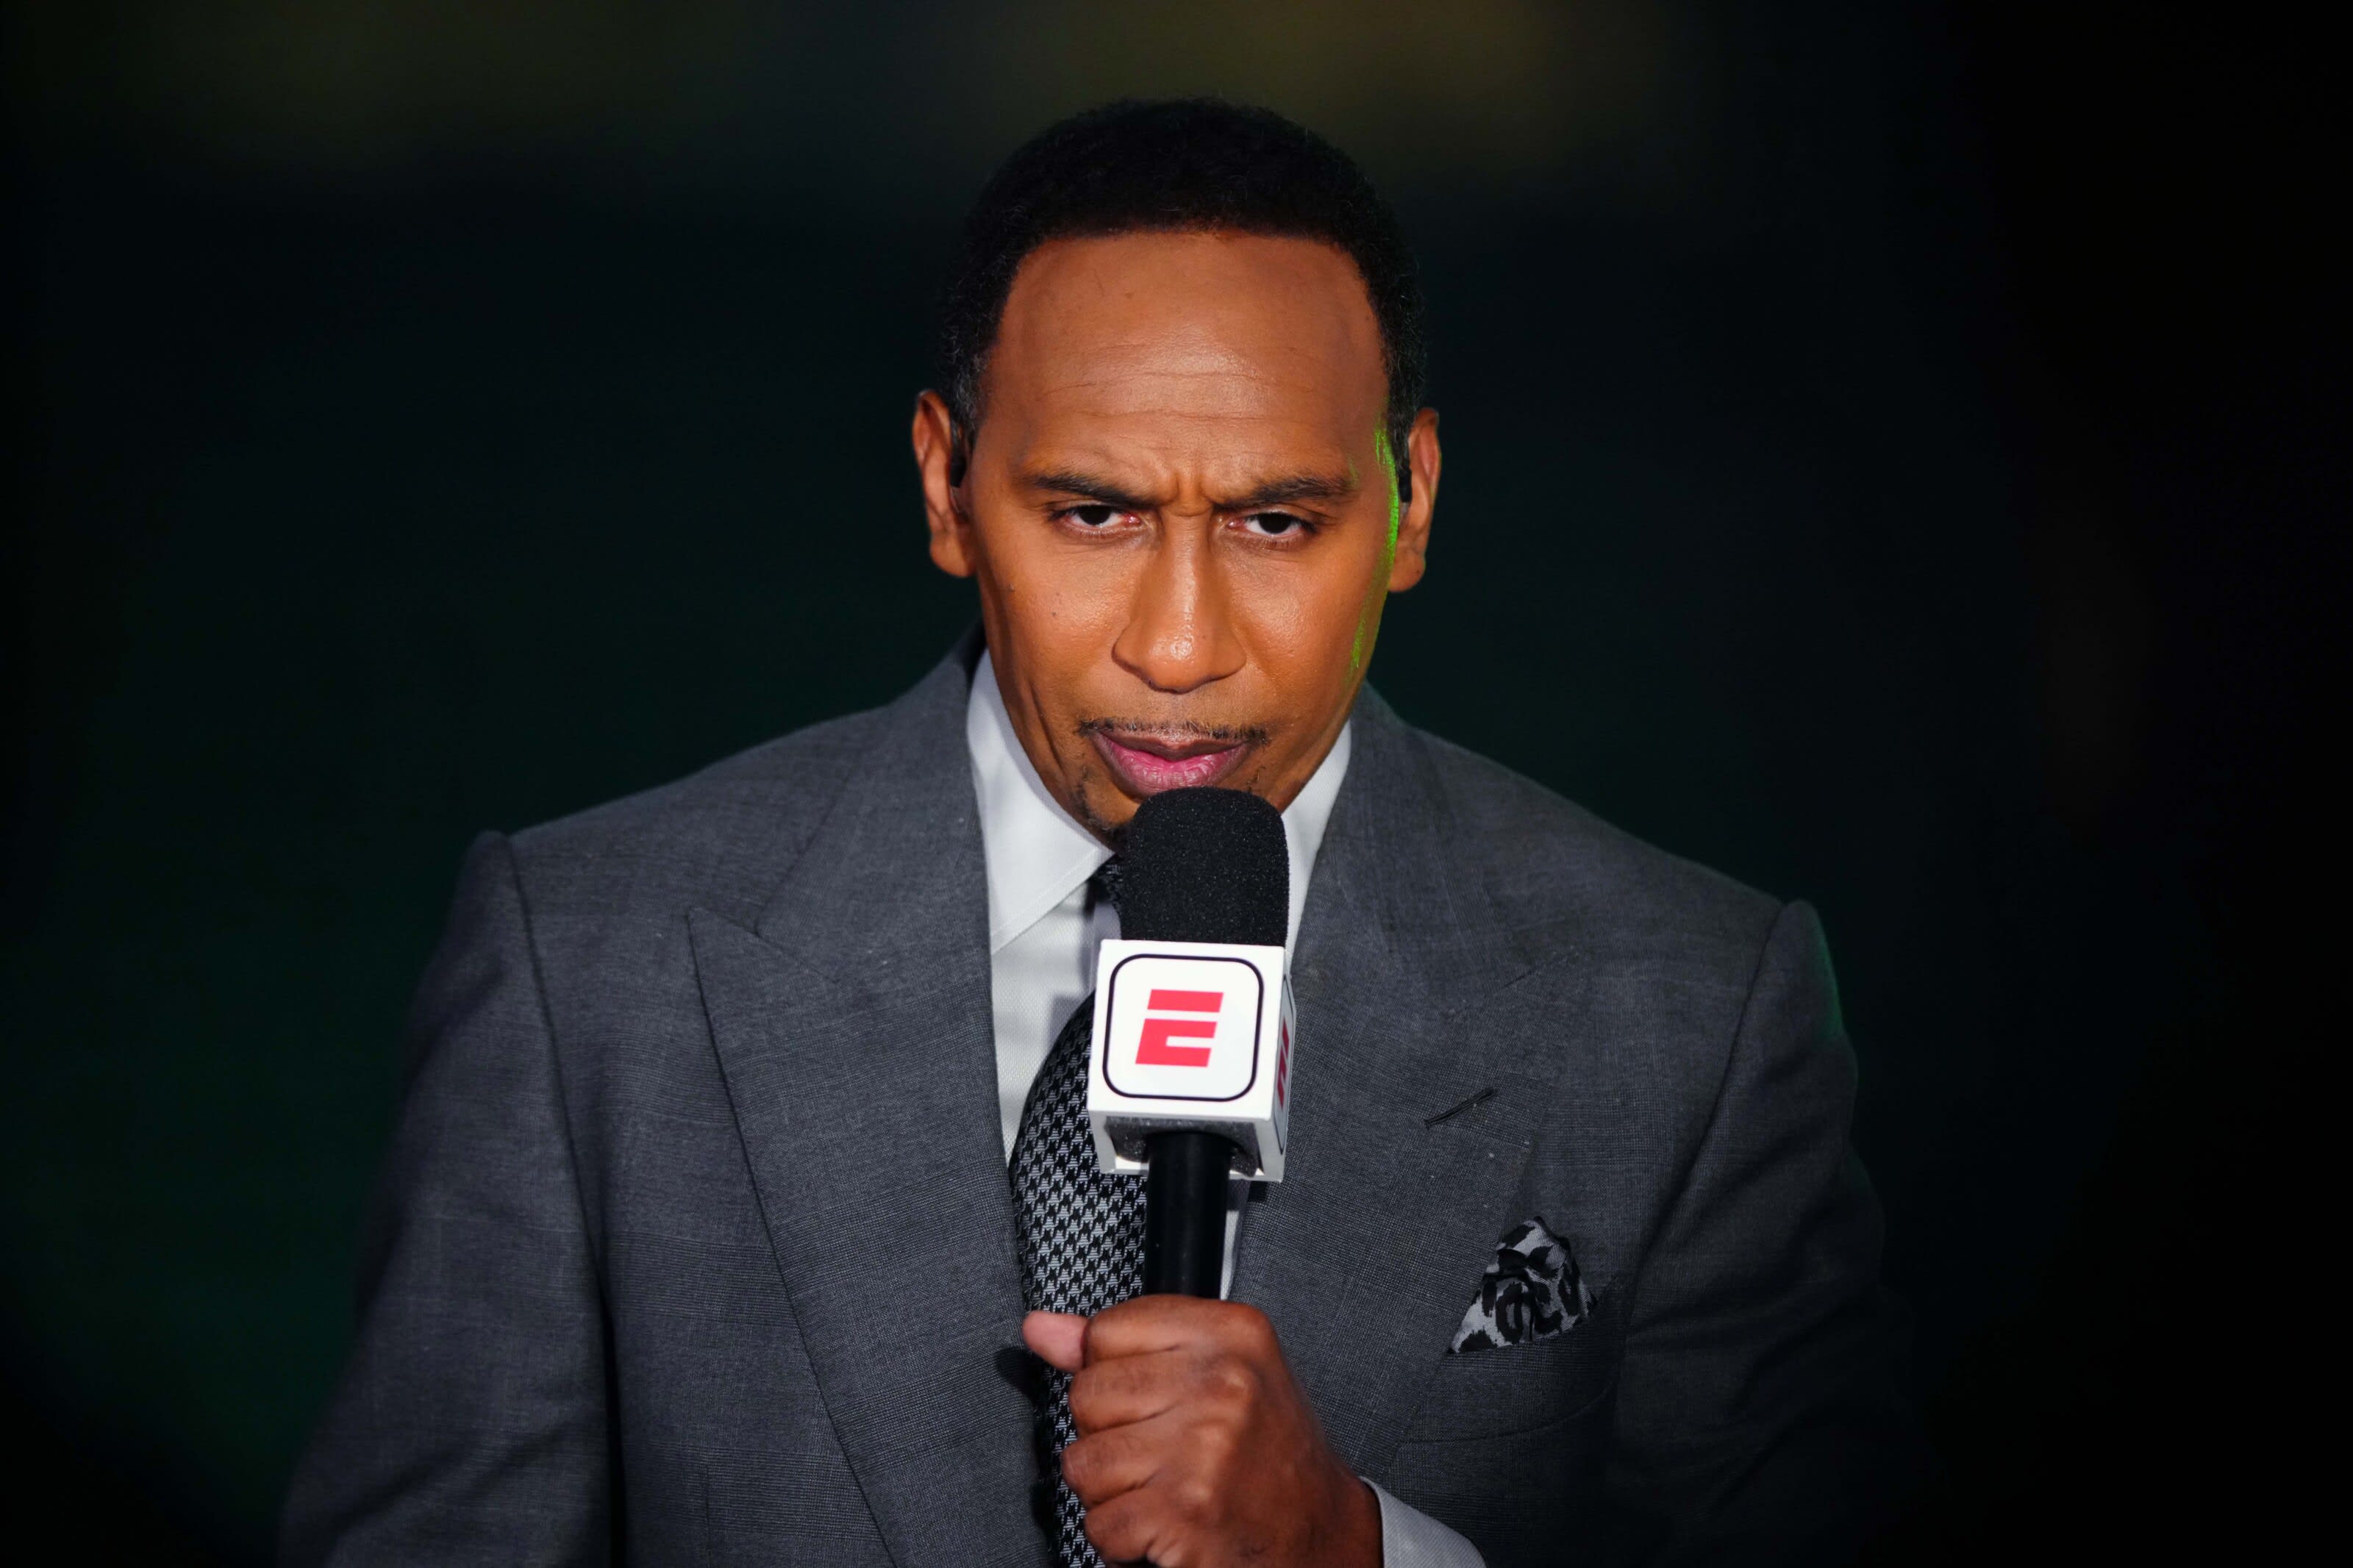 Stephen A. Smith ranting about the New York Knicks is exactly what we needed